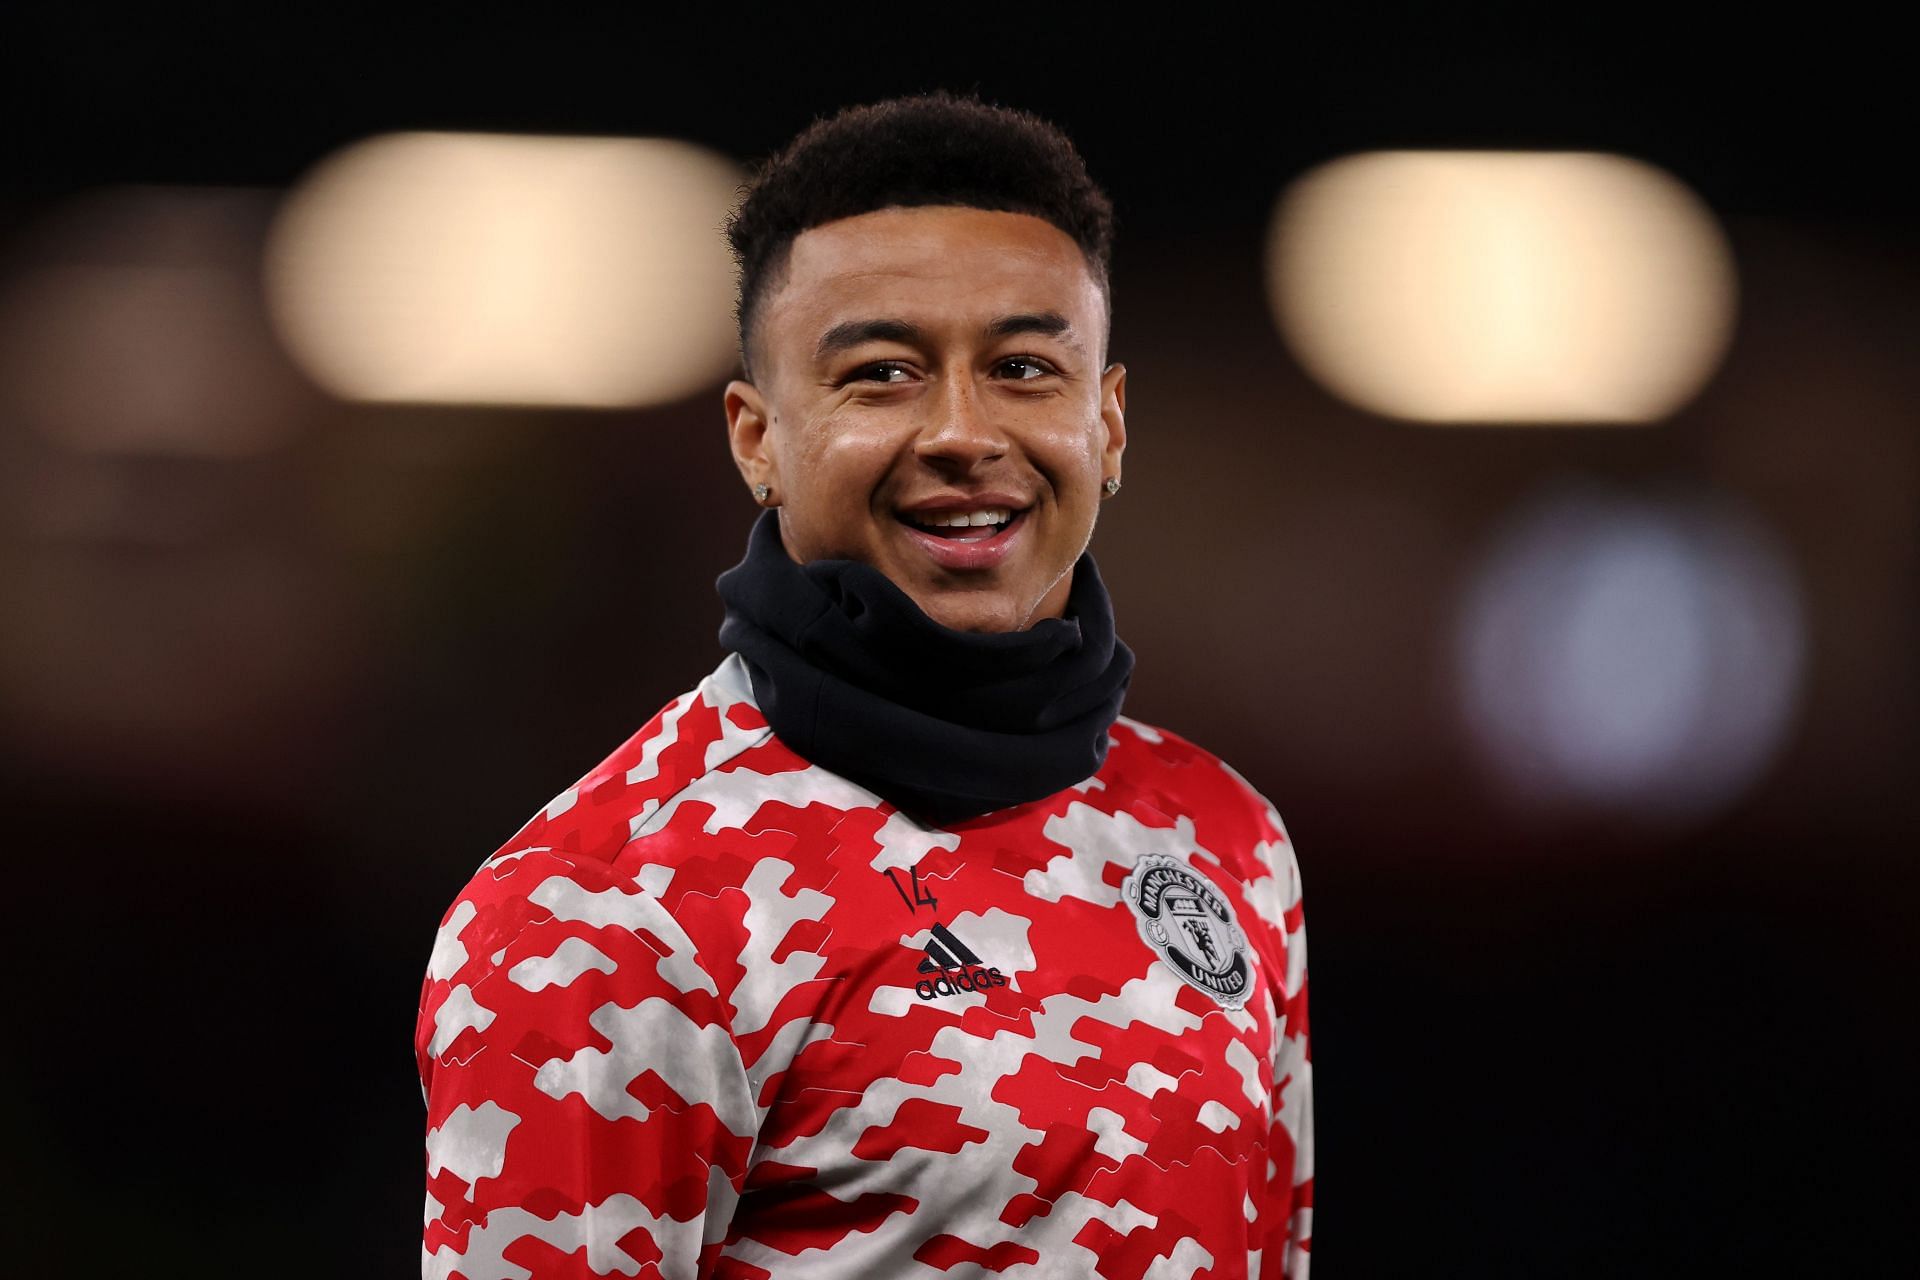 Everton have moved ahead of West Ham United in the race to sign Jesse Lingard